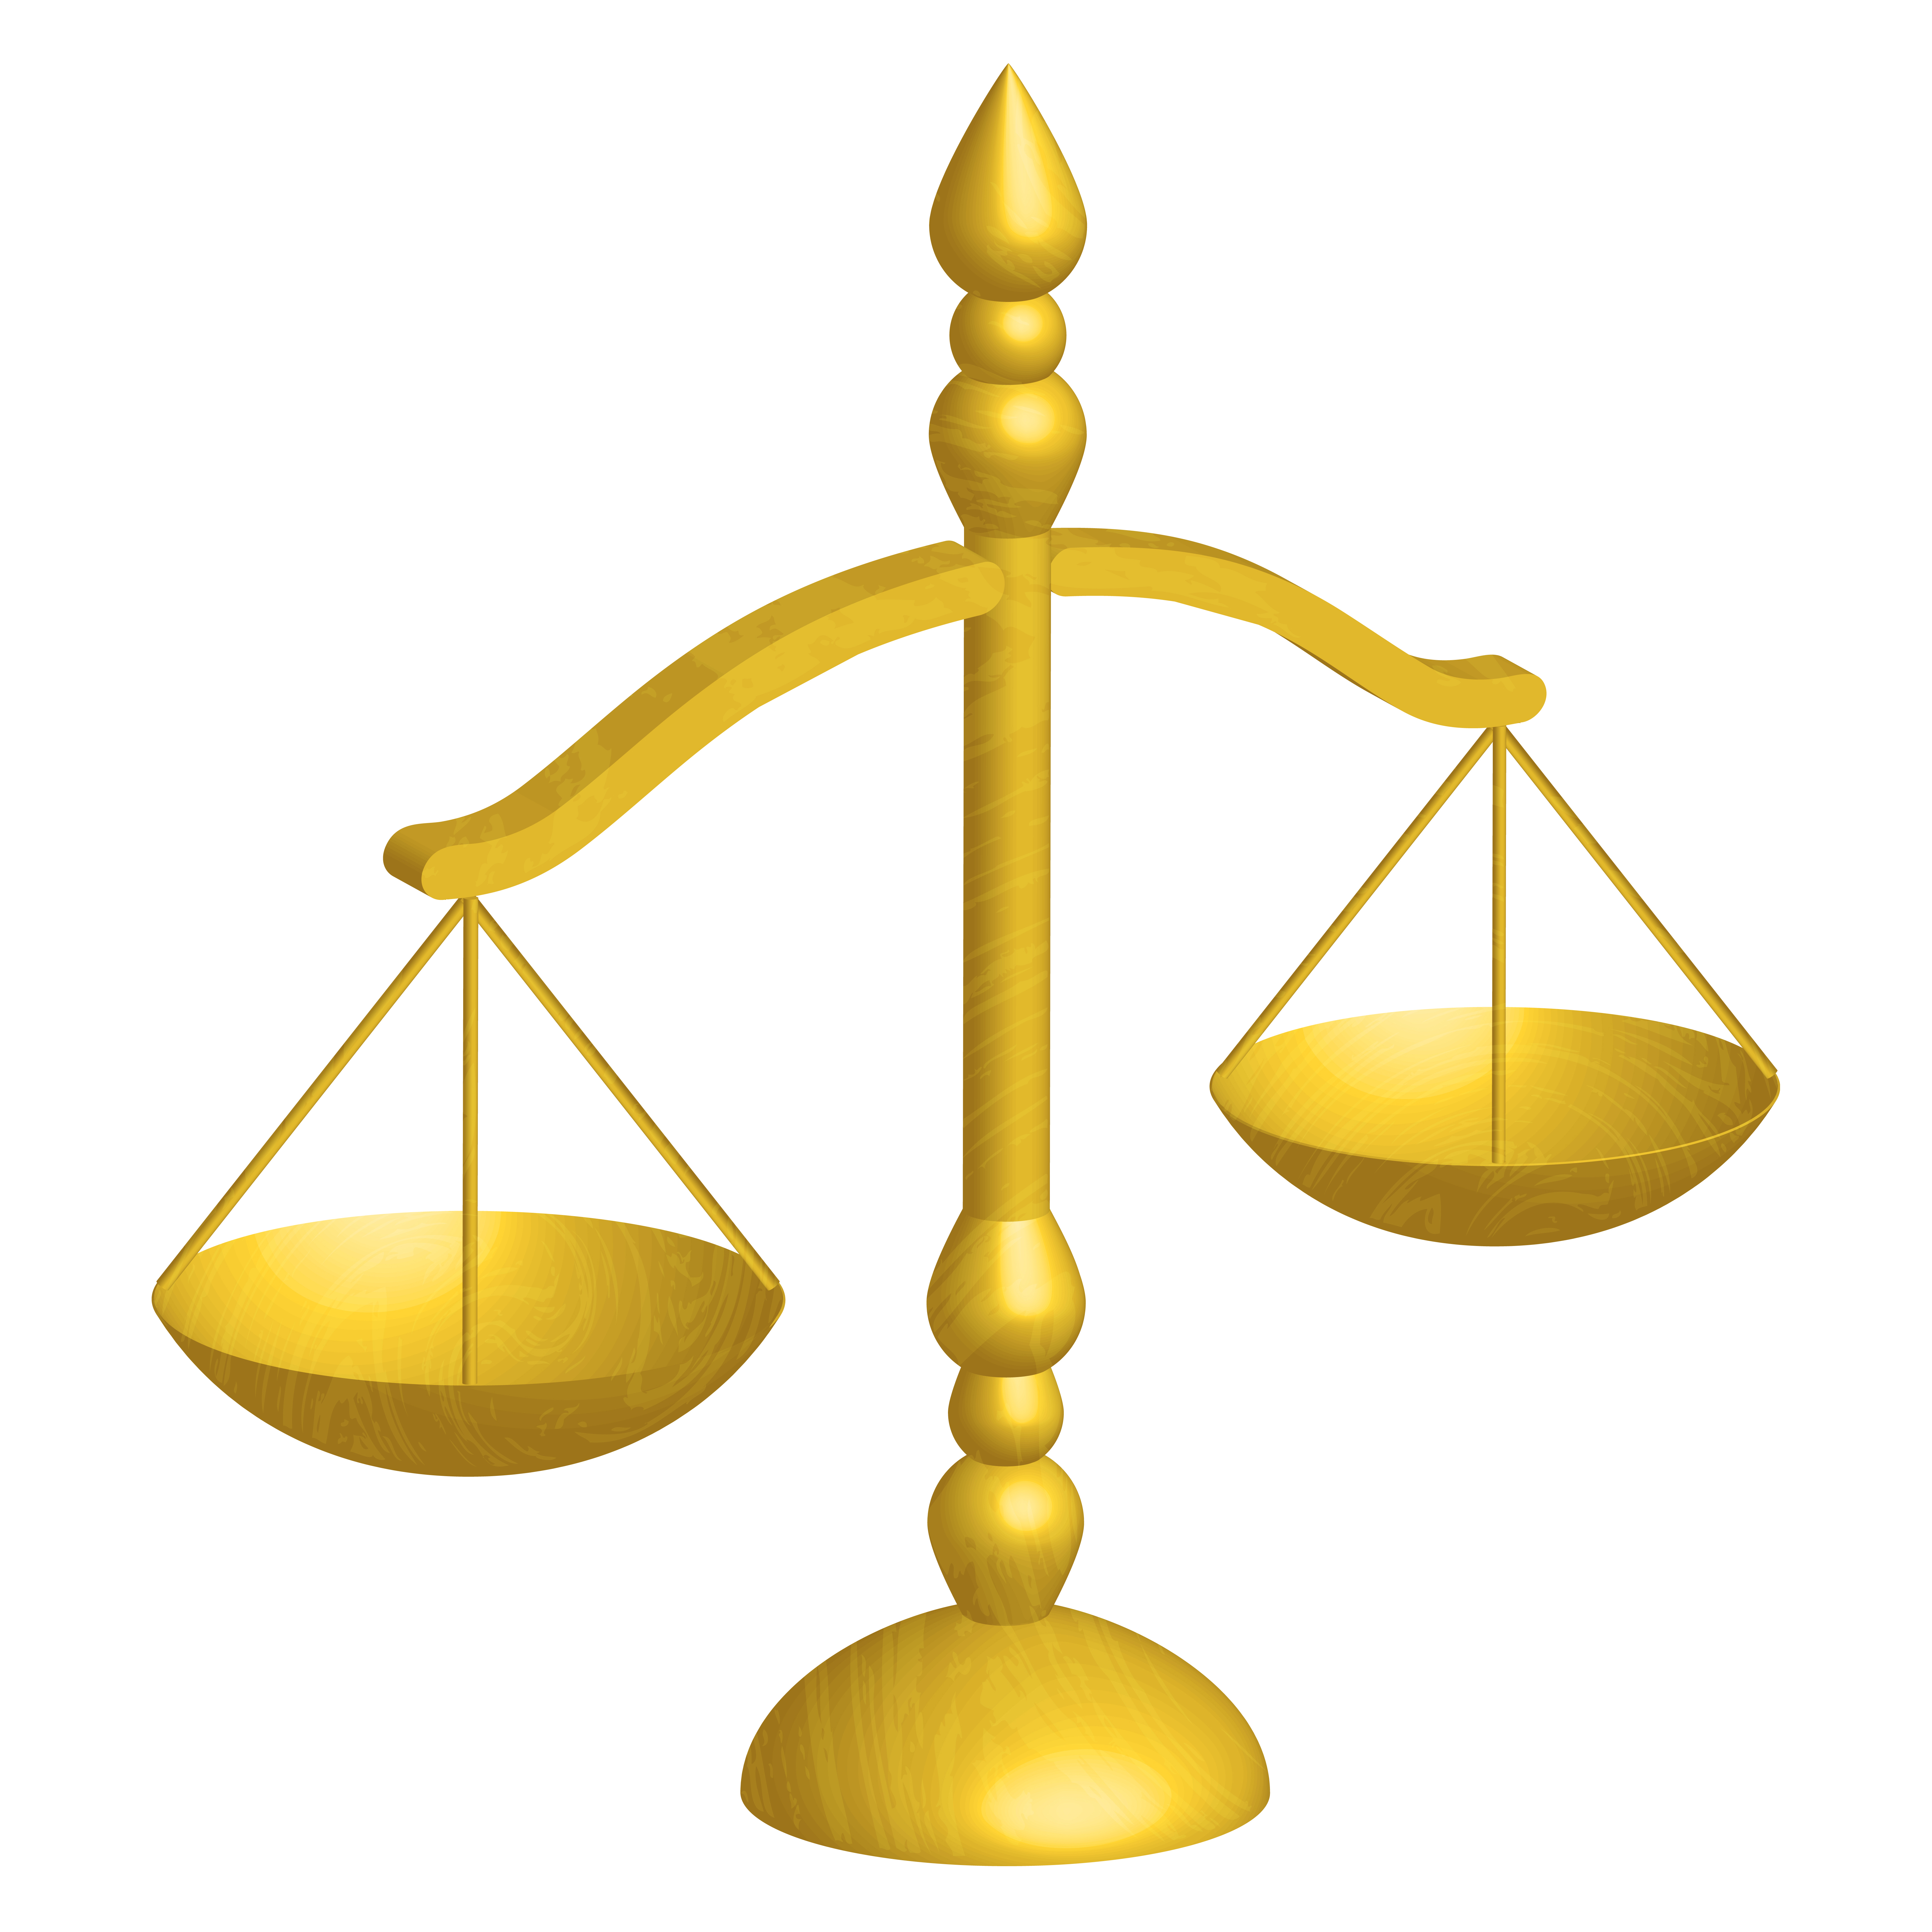 Justice Scales Clip Art - ClipArt Best